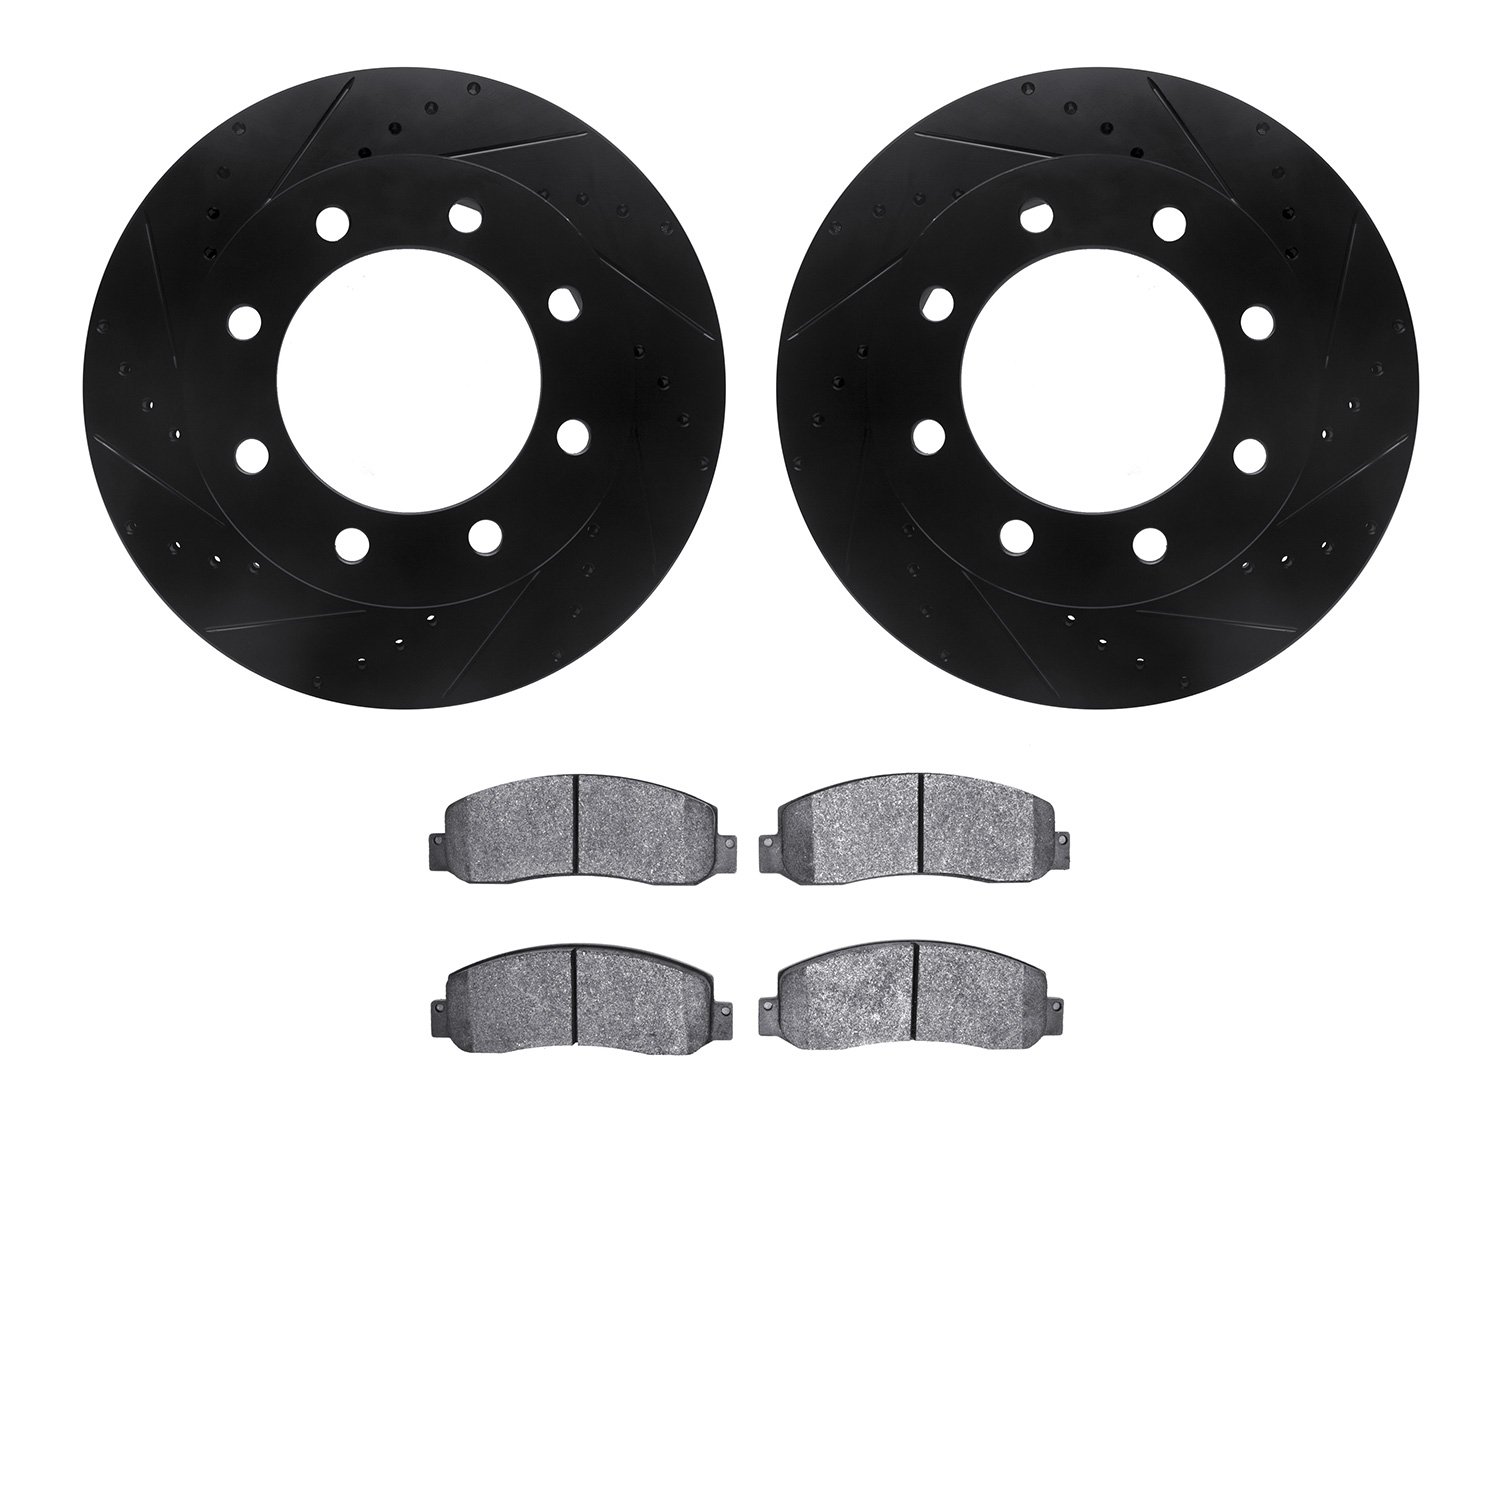 8402-54080 Drilled/Slotted Brake Rotors with Ultimate-Duty Brake Pads Kit [Black], 2005-2011 Ford/Lincoln/Mercury/Mazda, Positio